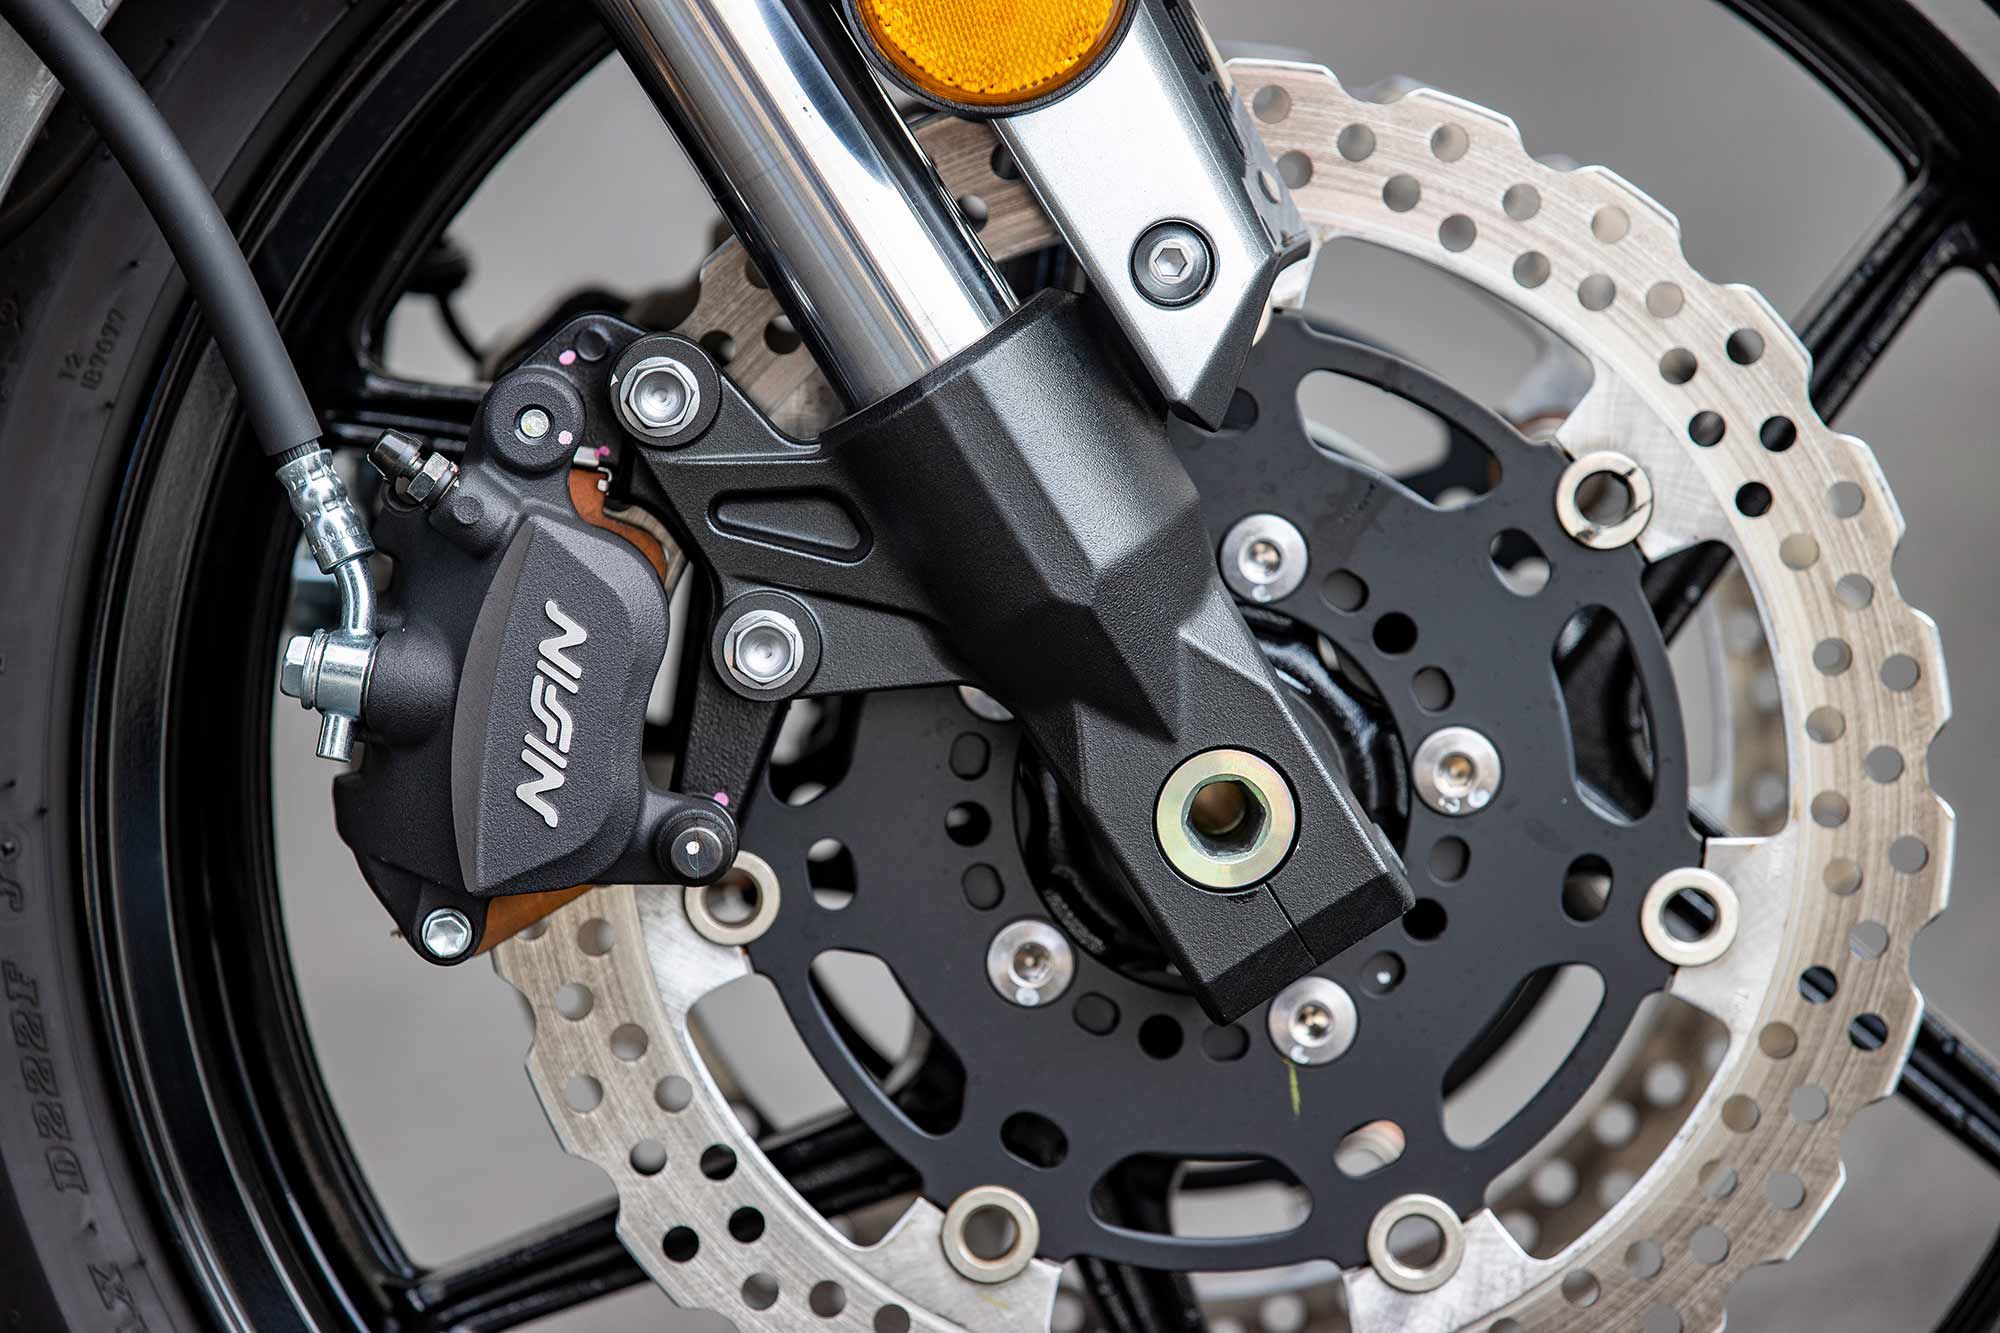 Kawasaki employed a pair of axial-mounted Nissin two-piston calipers and 300mm discs up front. A swap to an aftermarket brake pad may improve feel.